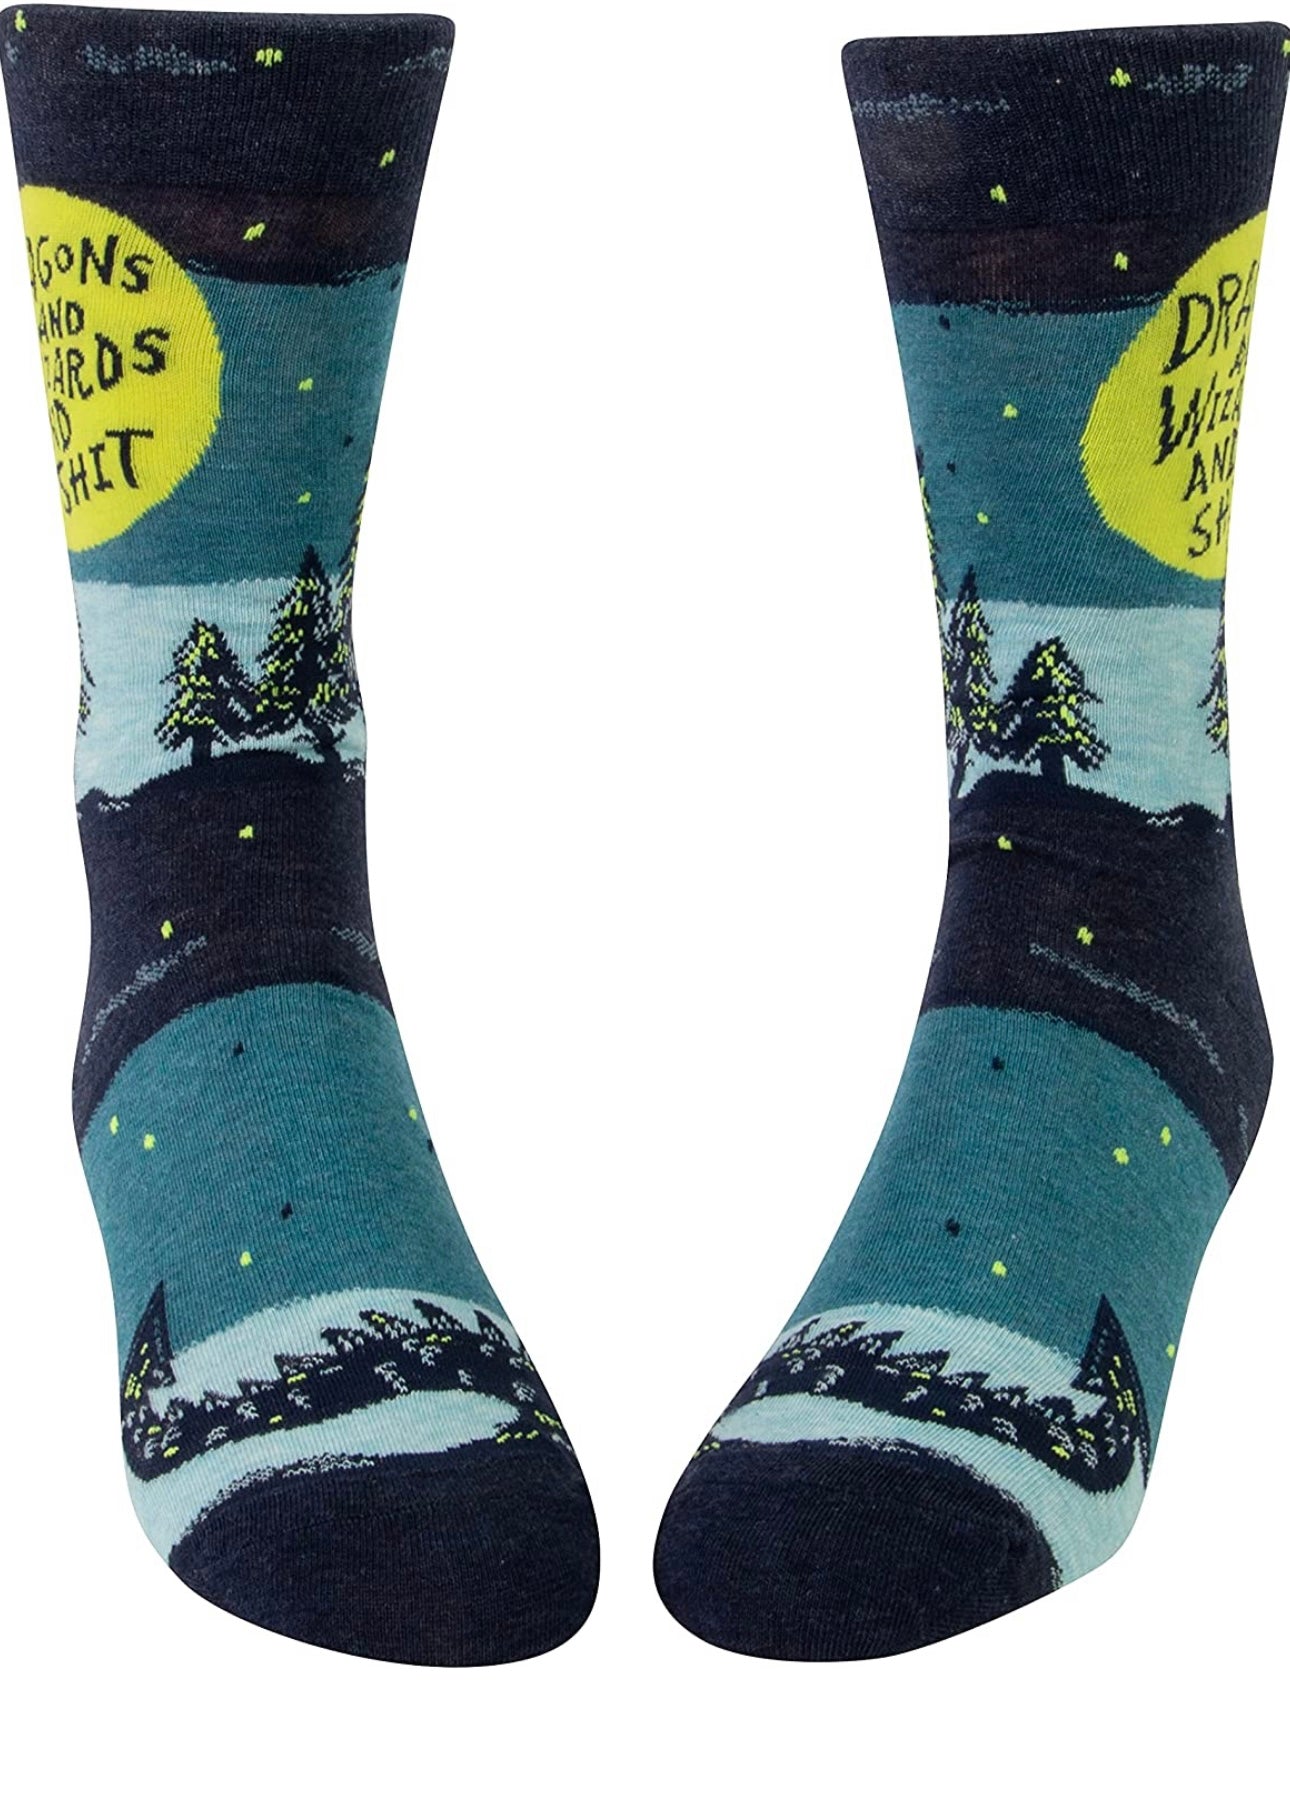 Dragons and Wizards and Shit Men's Crew Novelty Blue Q Socks